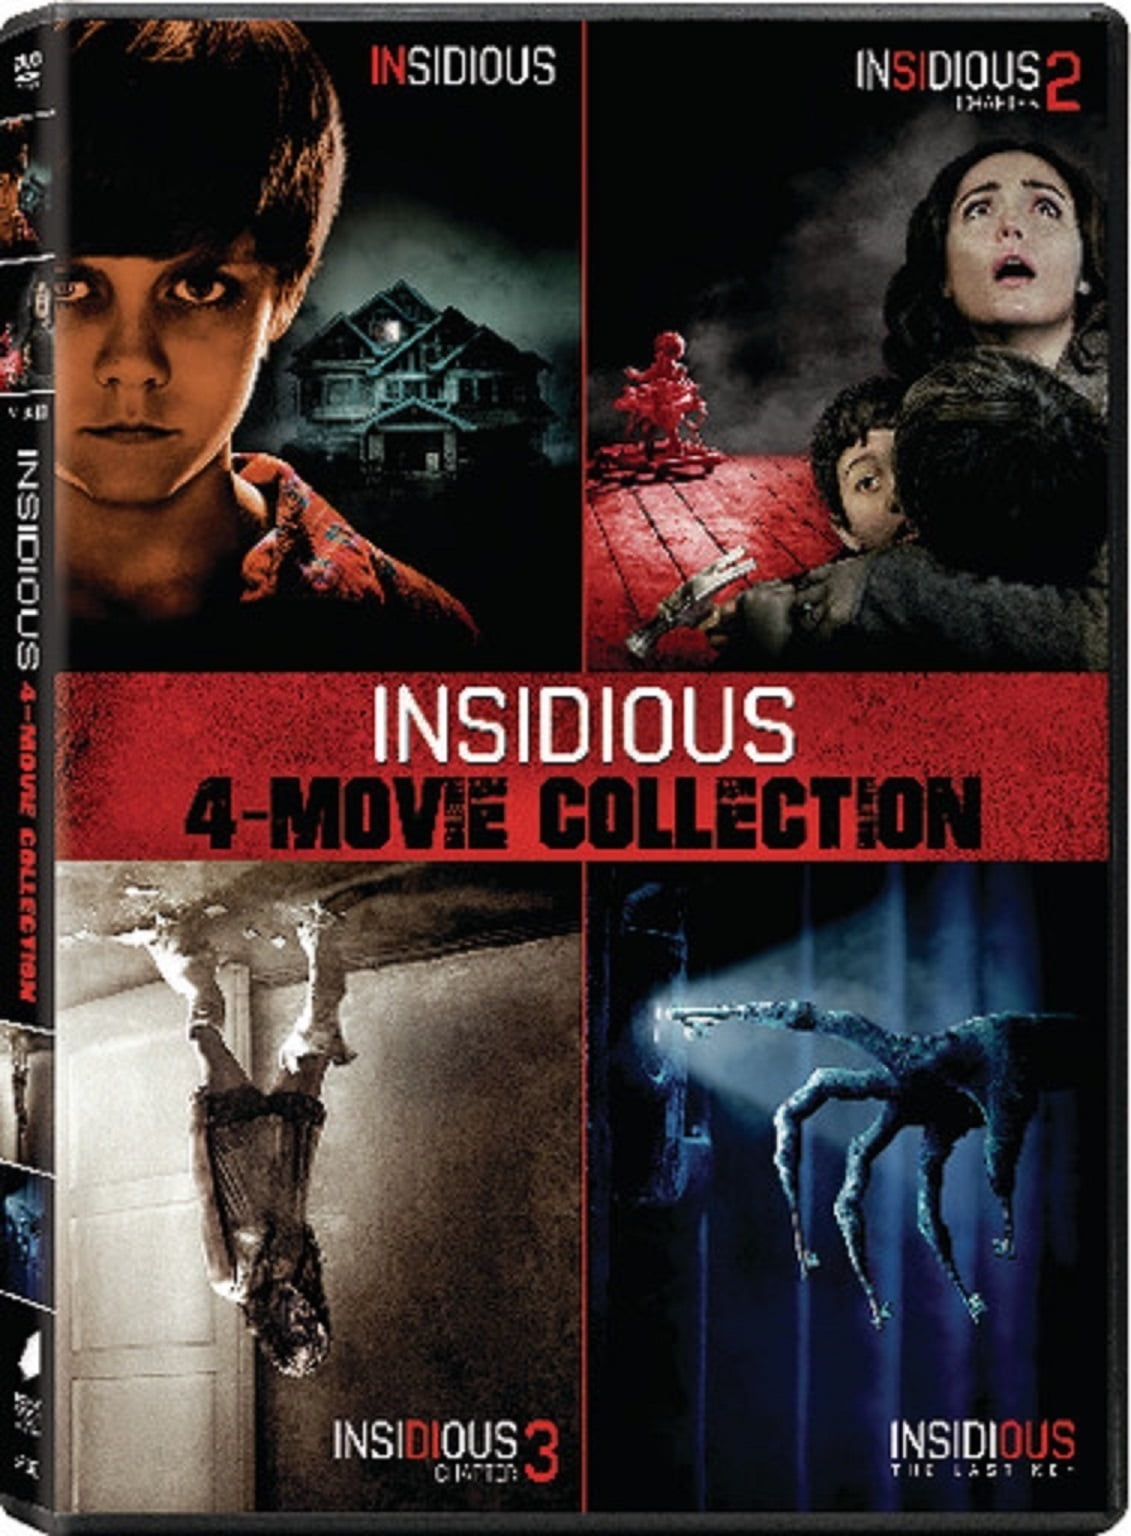 Insidious / Insidious: Chapter 2 / Insidious: Chapter 3 / Insidious: The Last Key [DVD] by Sony Pictures Home Entertainment